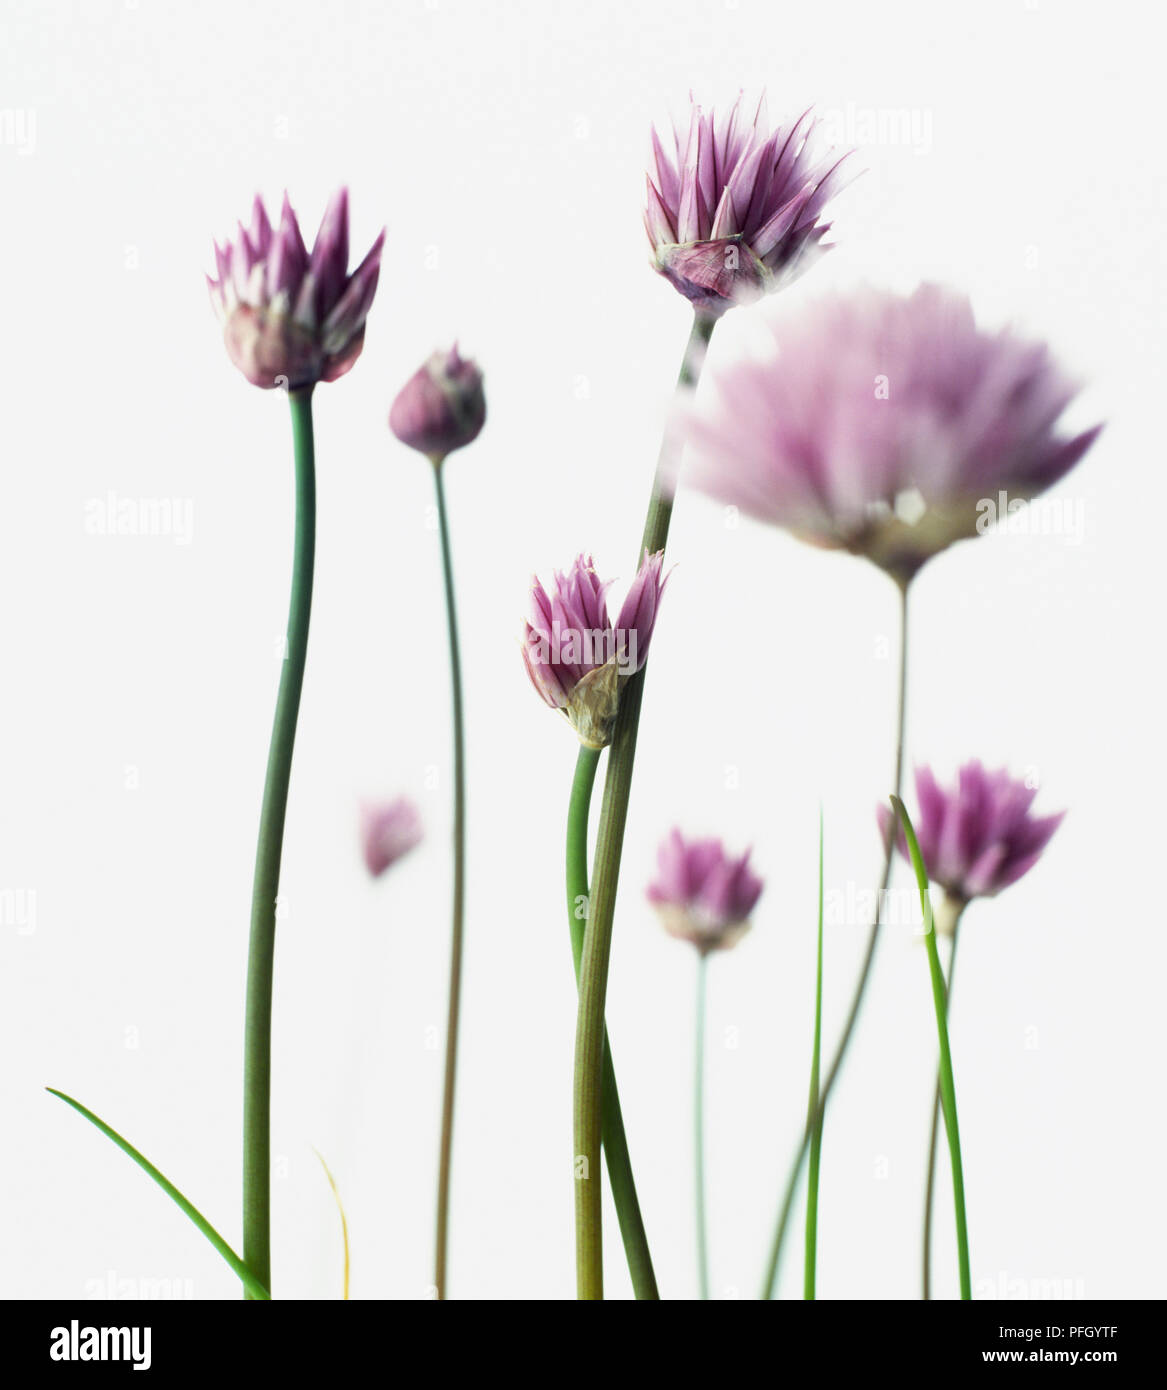 Focus on purple, globe-shaped chive flowers (Allium schoenoprasum) compounded of individual bulbils, with green, cylindrical, hollow leaves Stock Photo